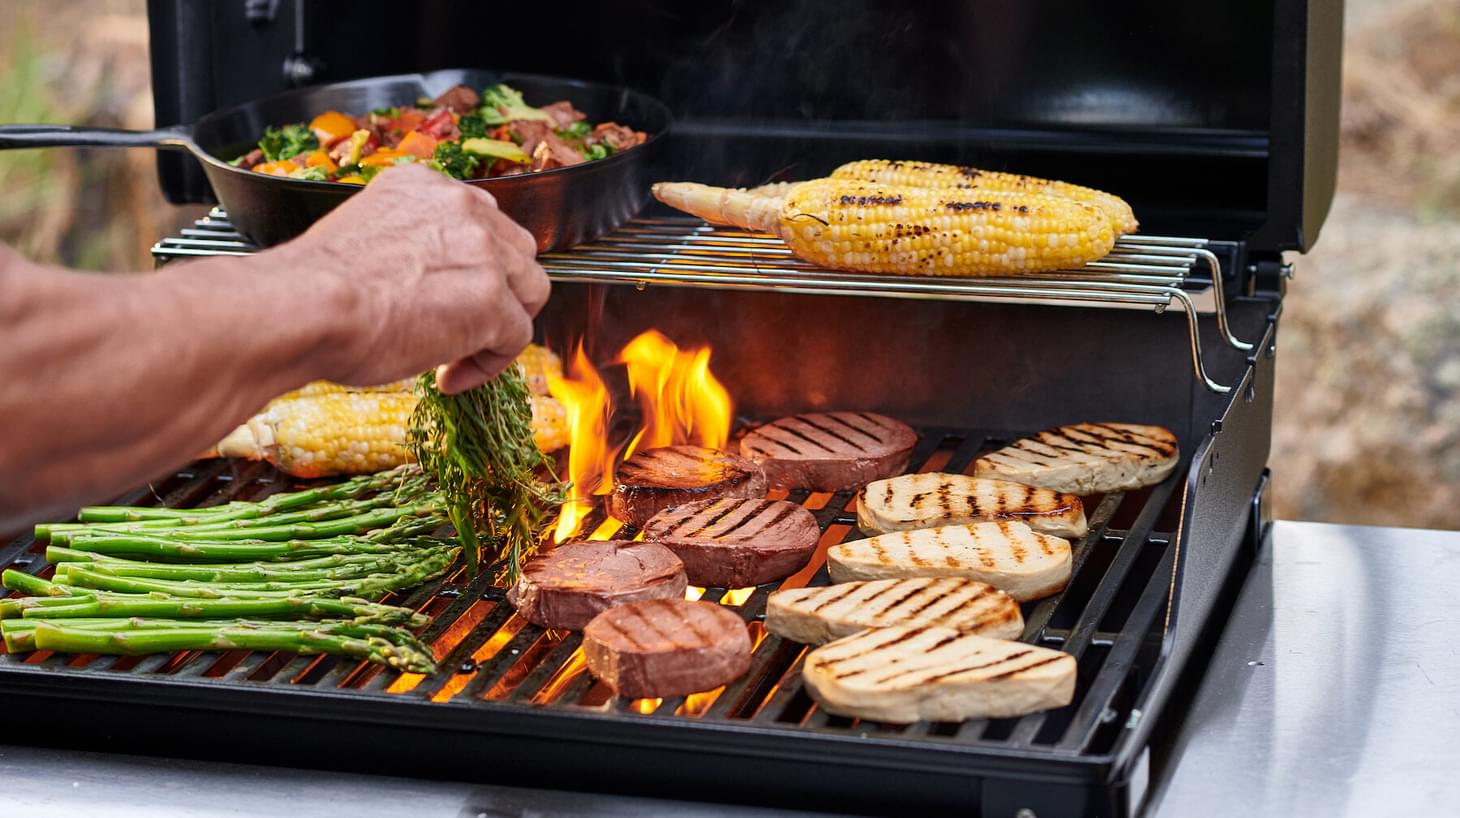 A close up shot of a grill top with vegetables and meati products being grilled